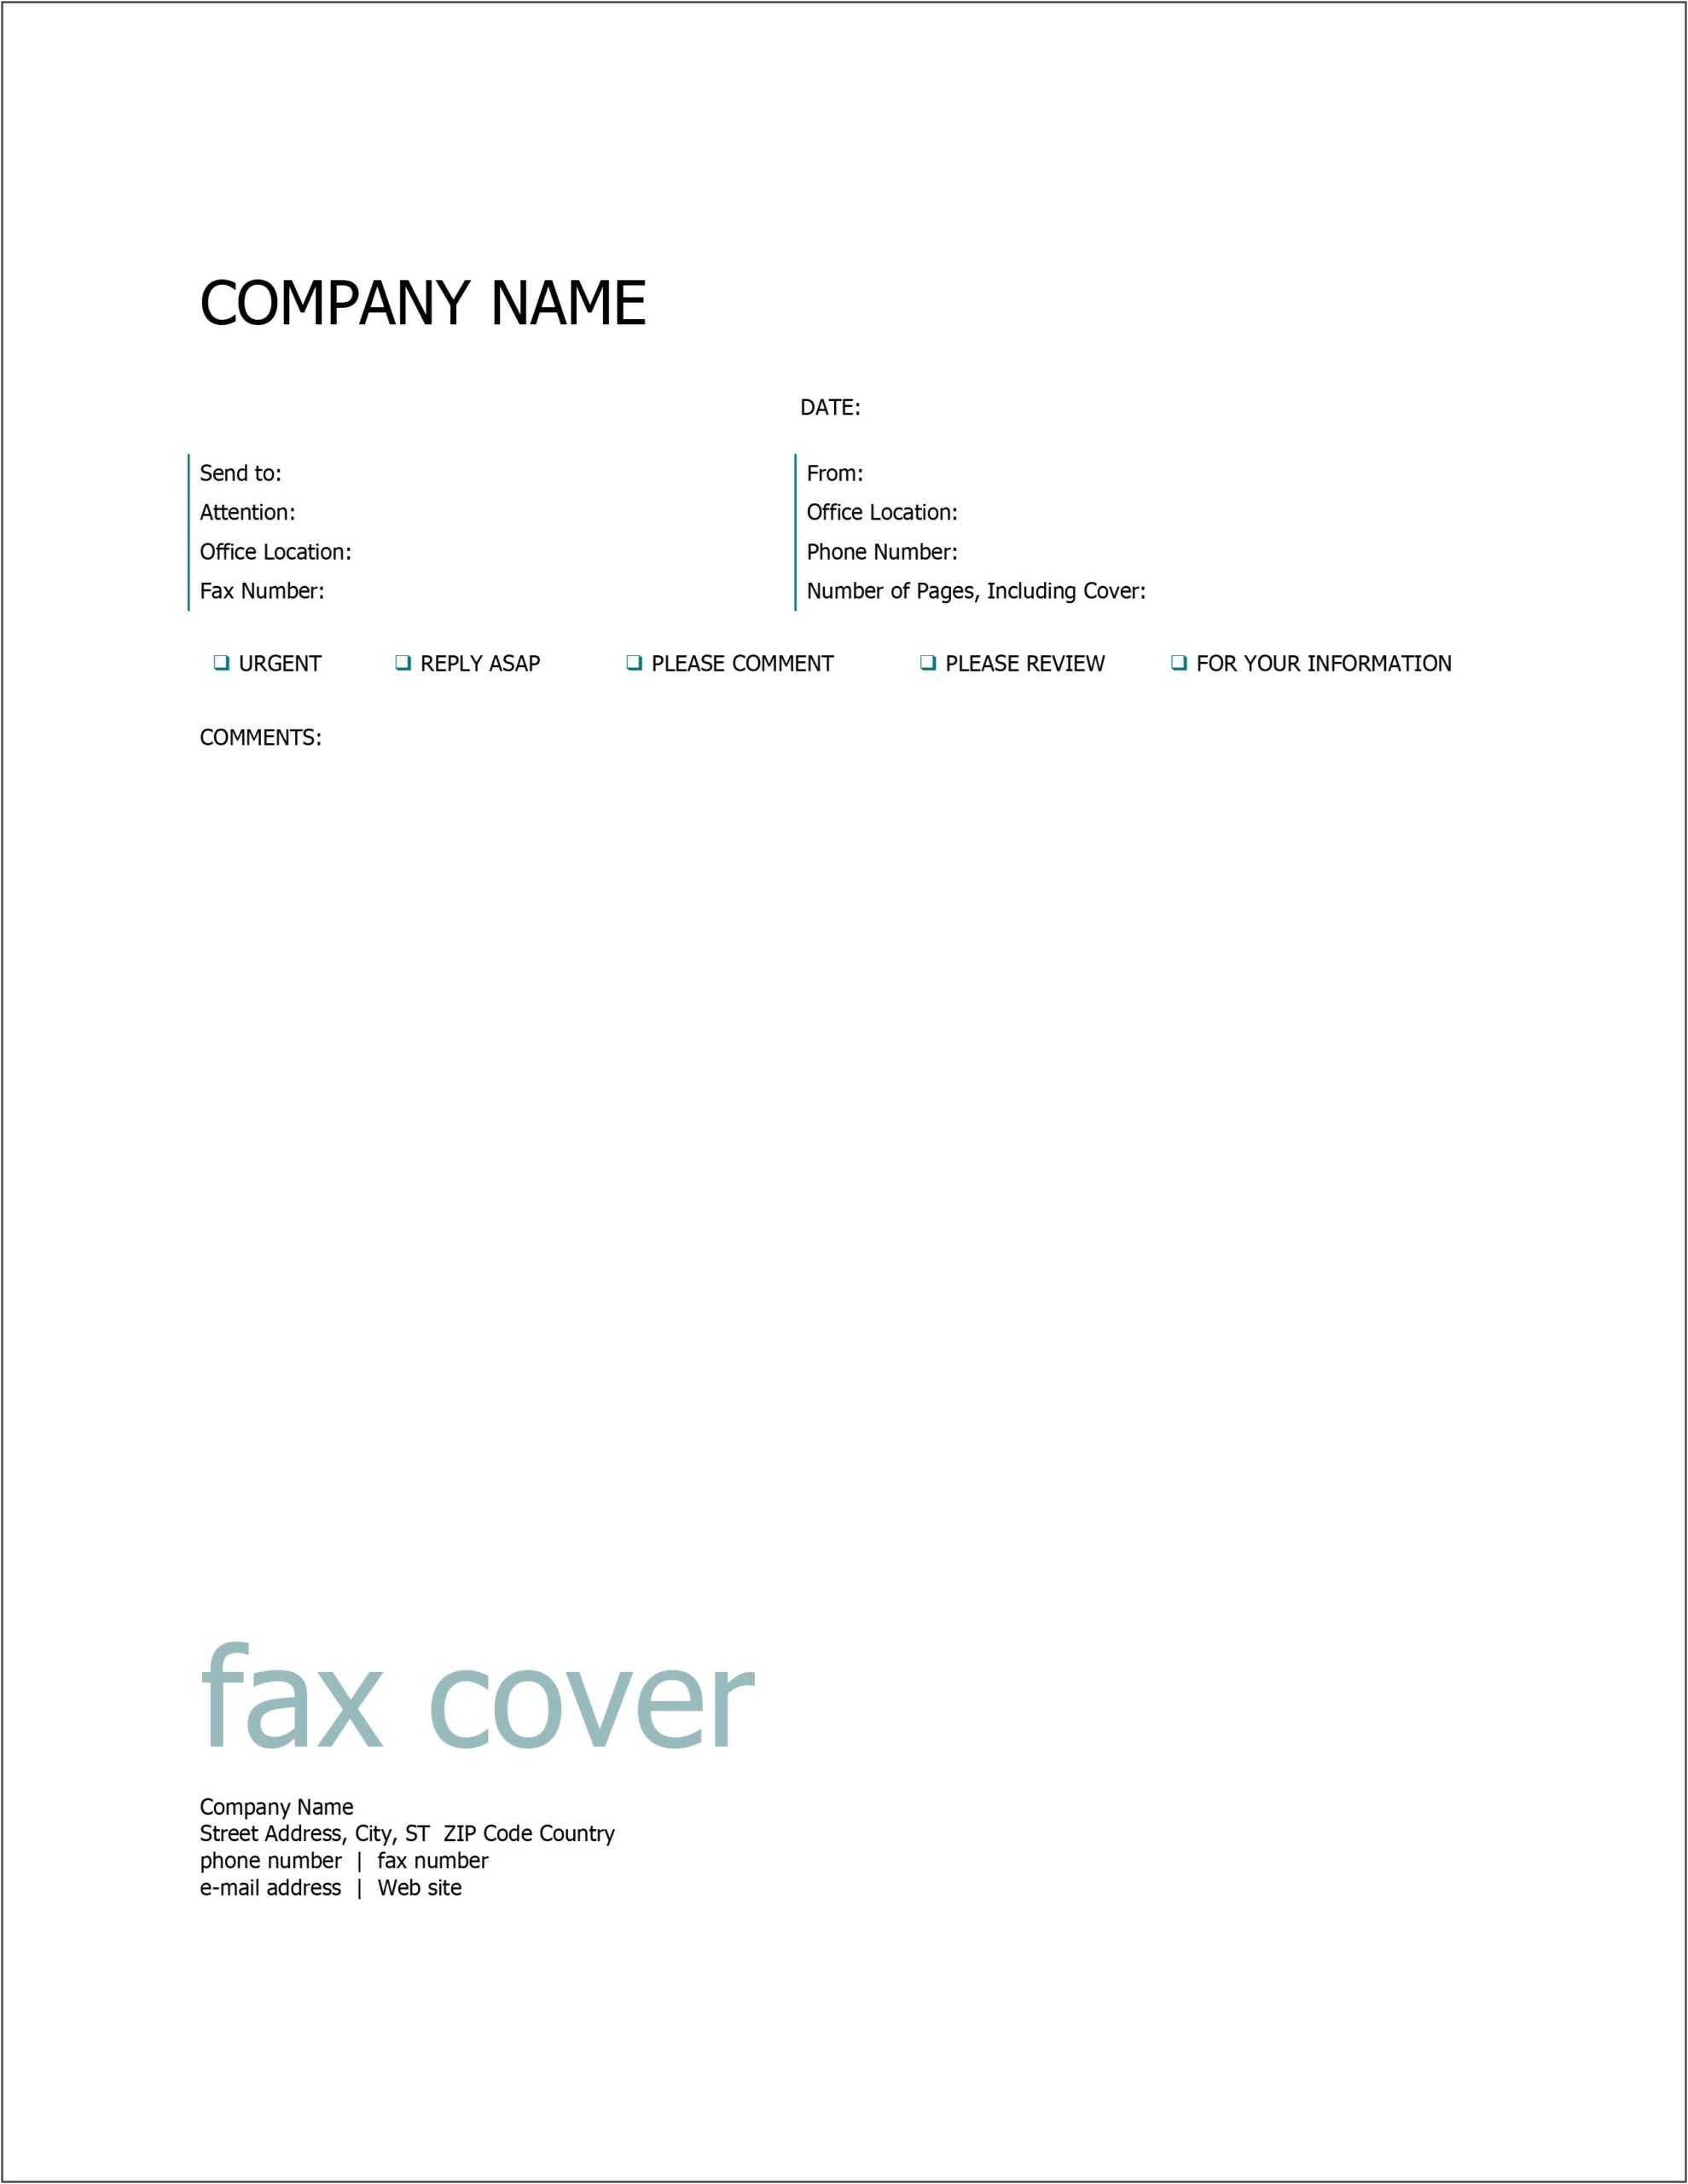 Fax Cover Sheet Template Word 2007